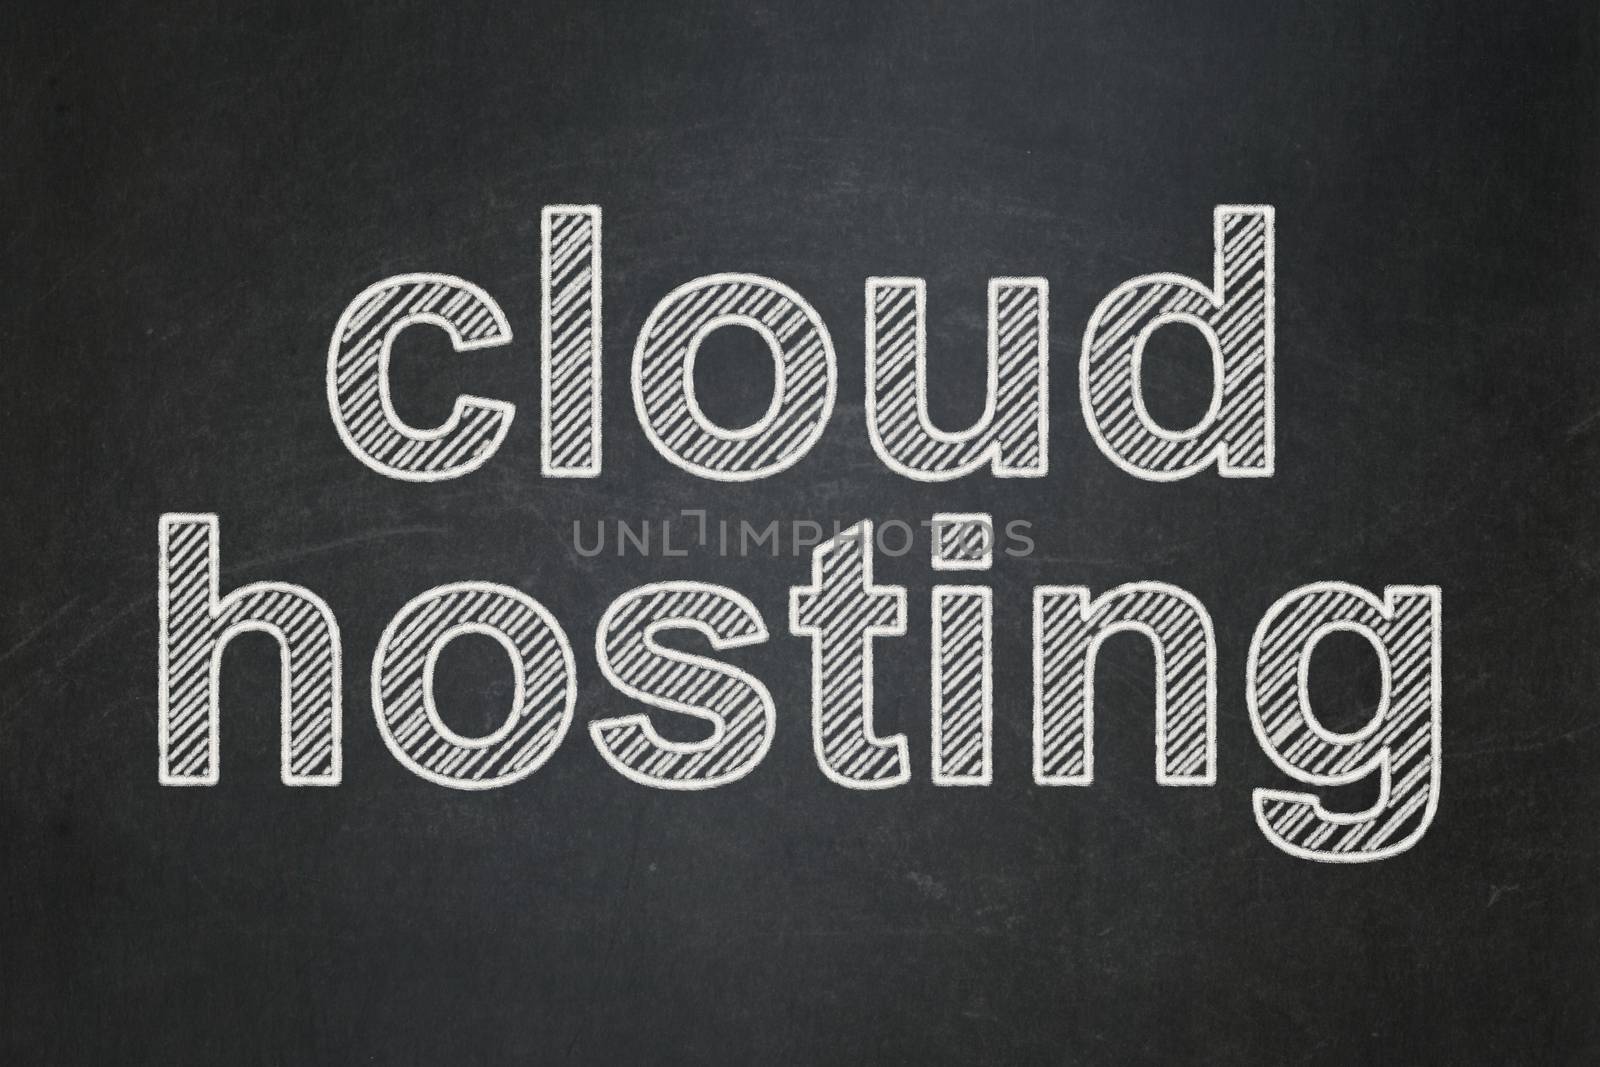 Cloud networking concept: text Cloud Hosting on Black chalkboard background